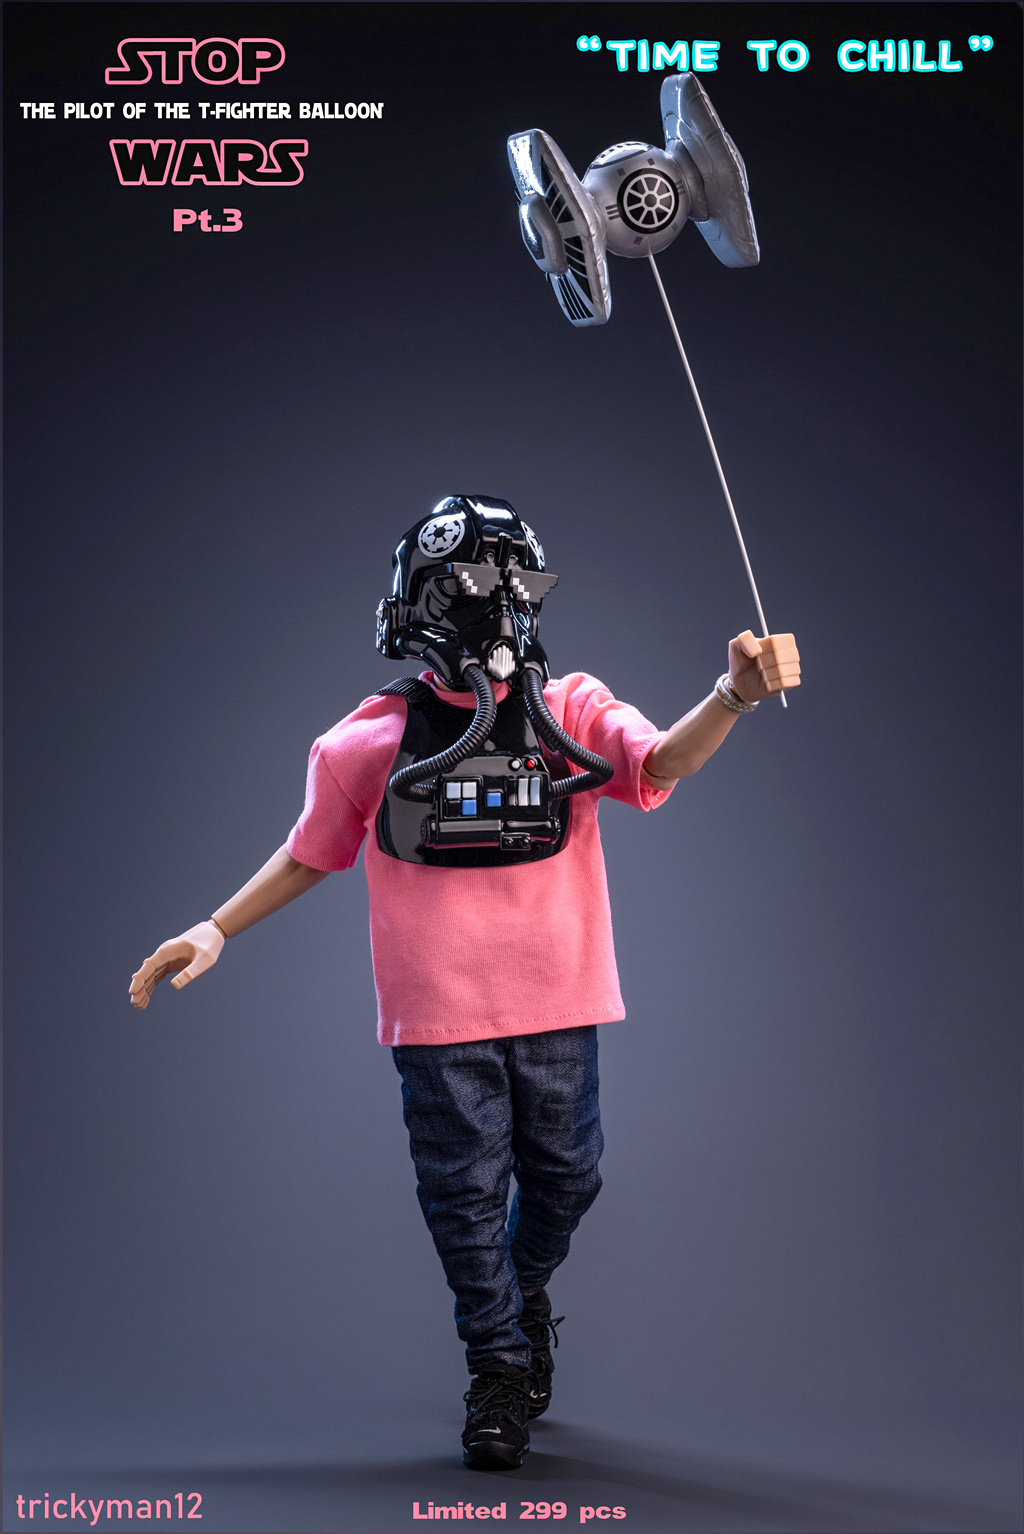 NEW PRODUCT: STOPWARS Pt.3: 1/6 scale THE PILOT OF THE T-FIGHTER BALLOON 16580212